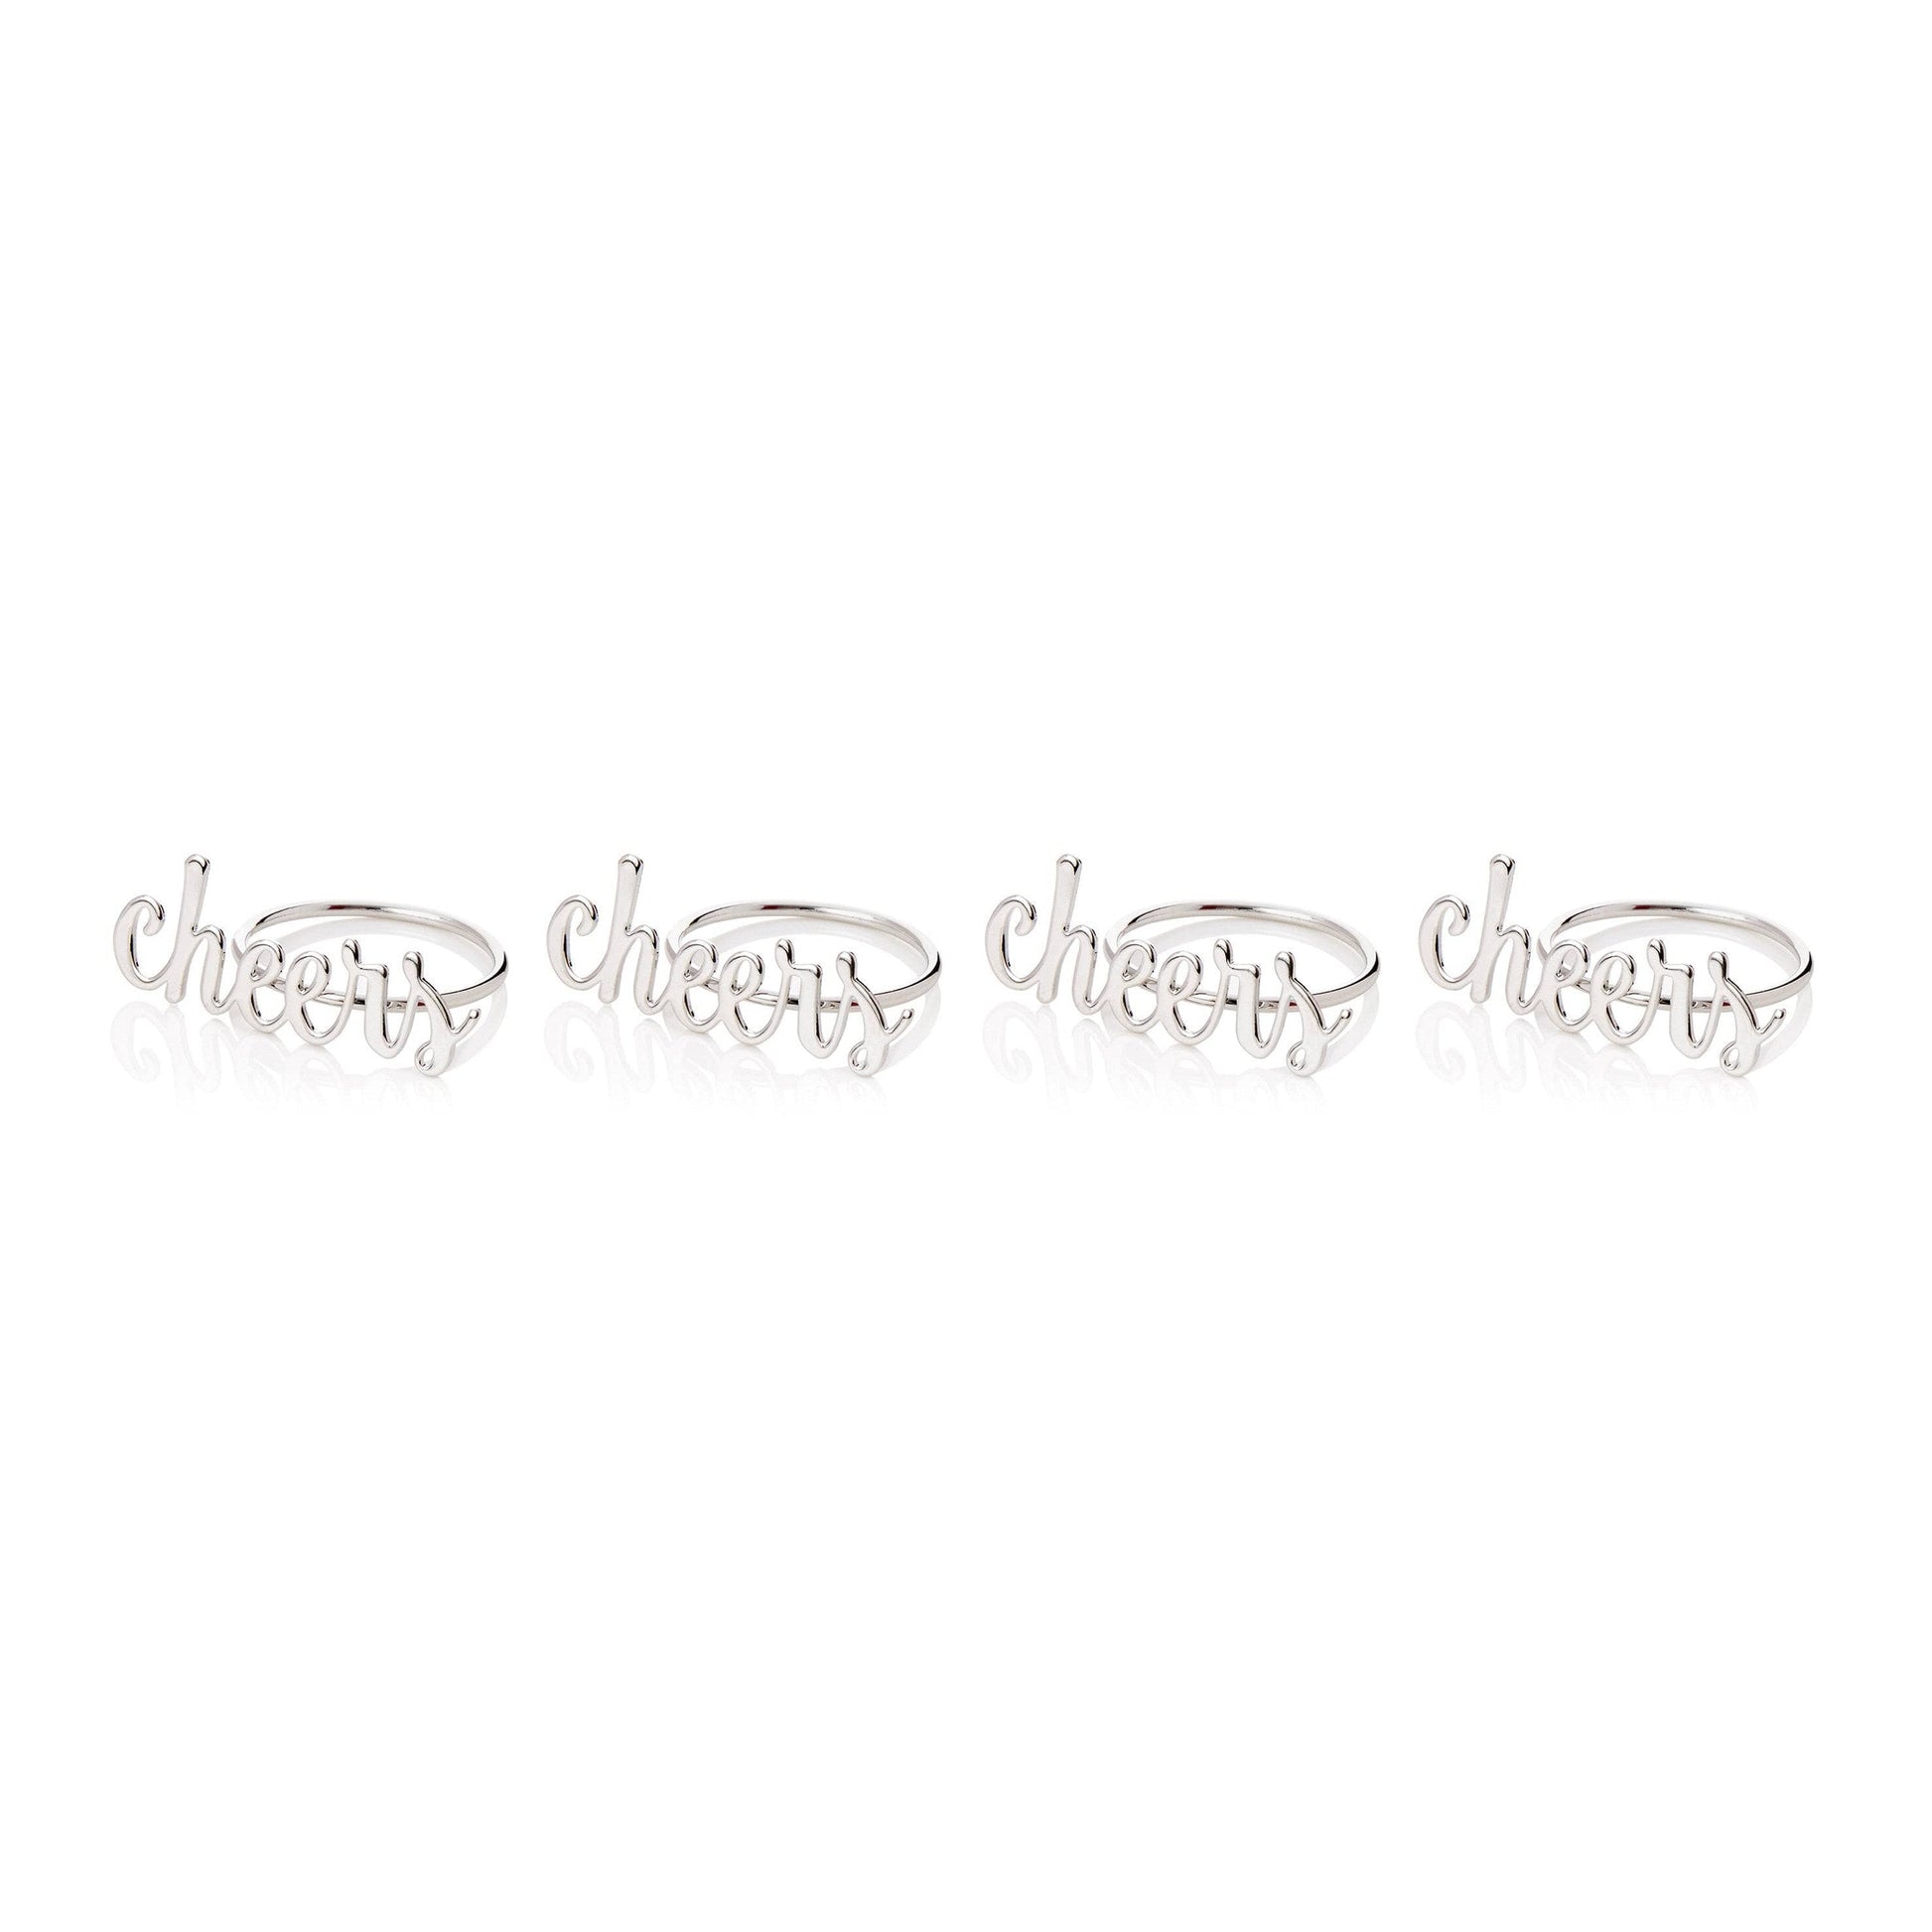 Silver 'Cheers' Napkin Holder - 4 Pack  -  60008726